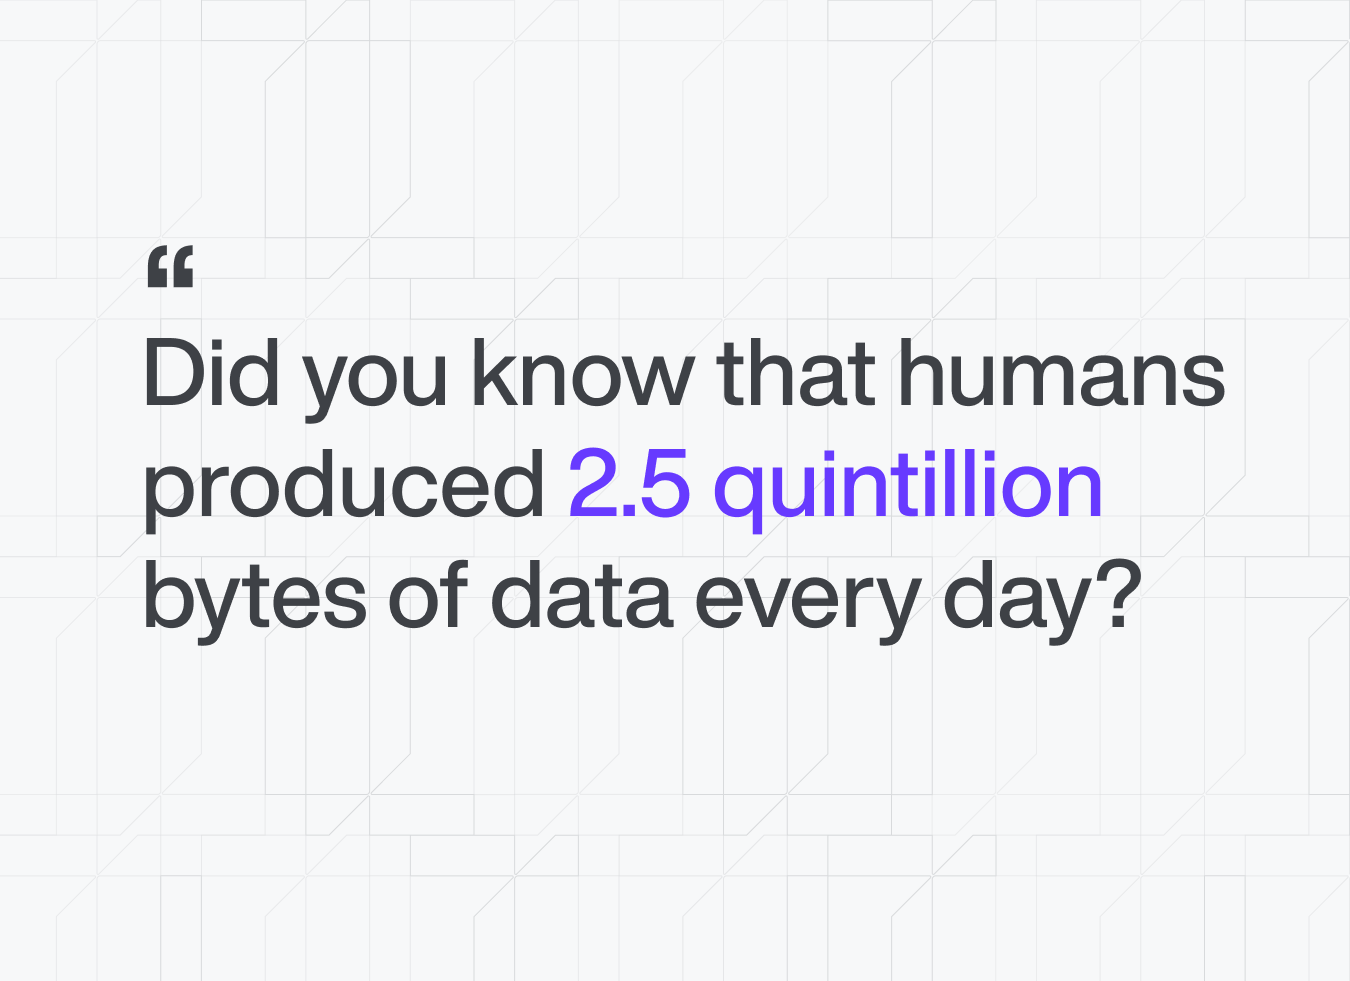 Humans produce 2.5 quintillion bytes of data every day